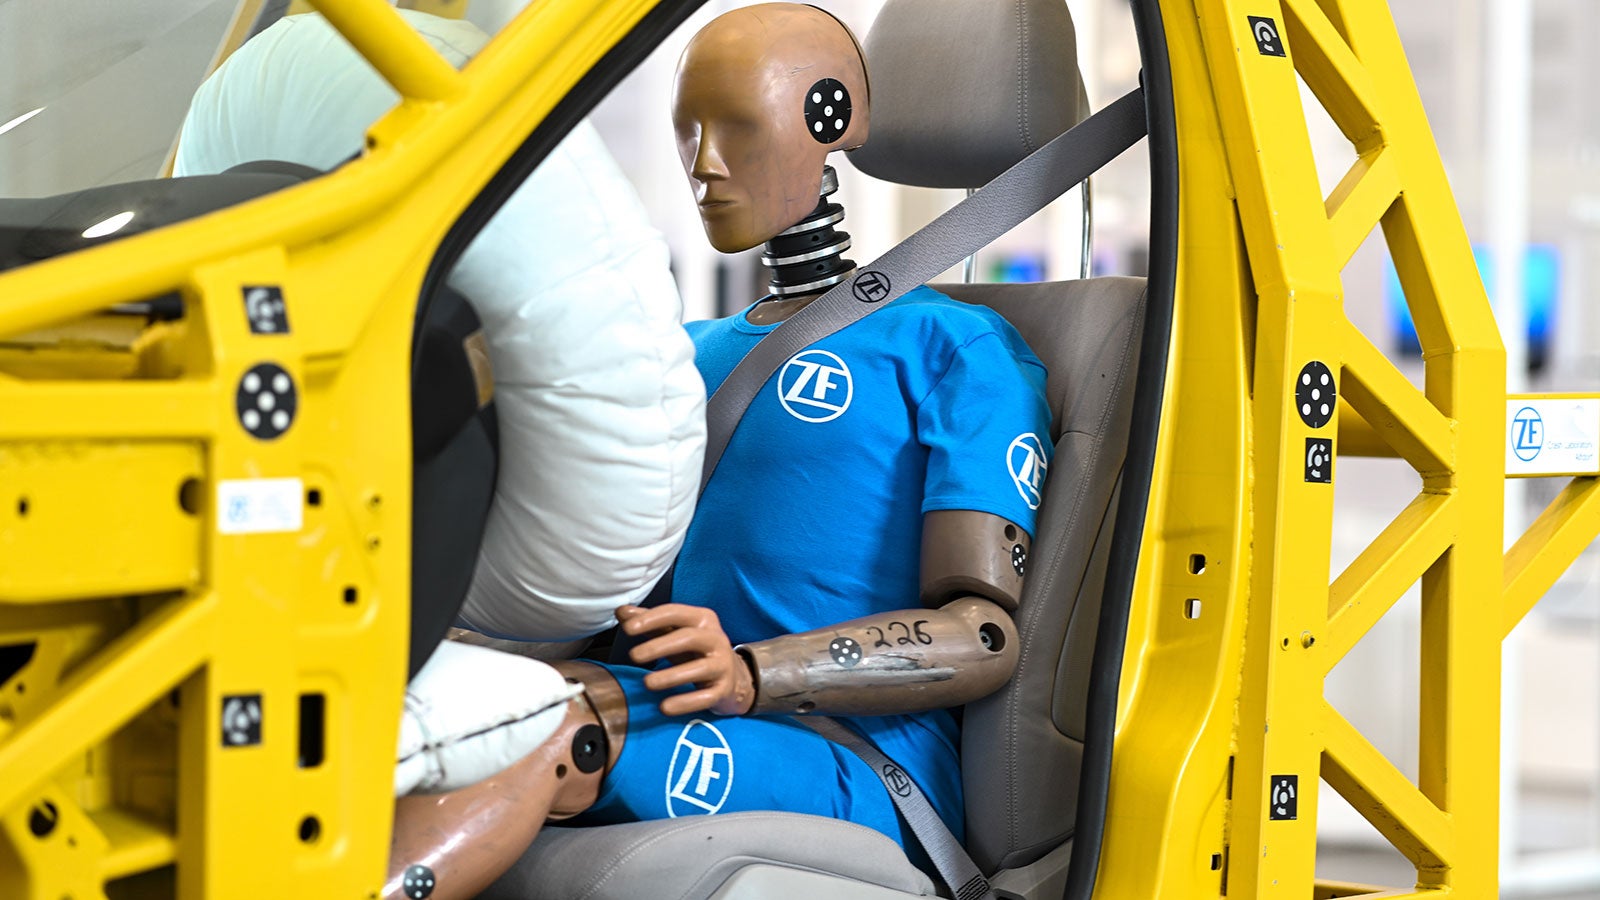 U.S. Crash Test Dummies Don’t Reflect the Population, Report Claims